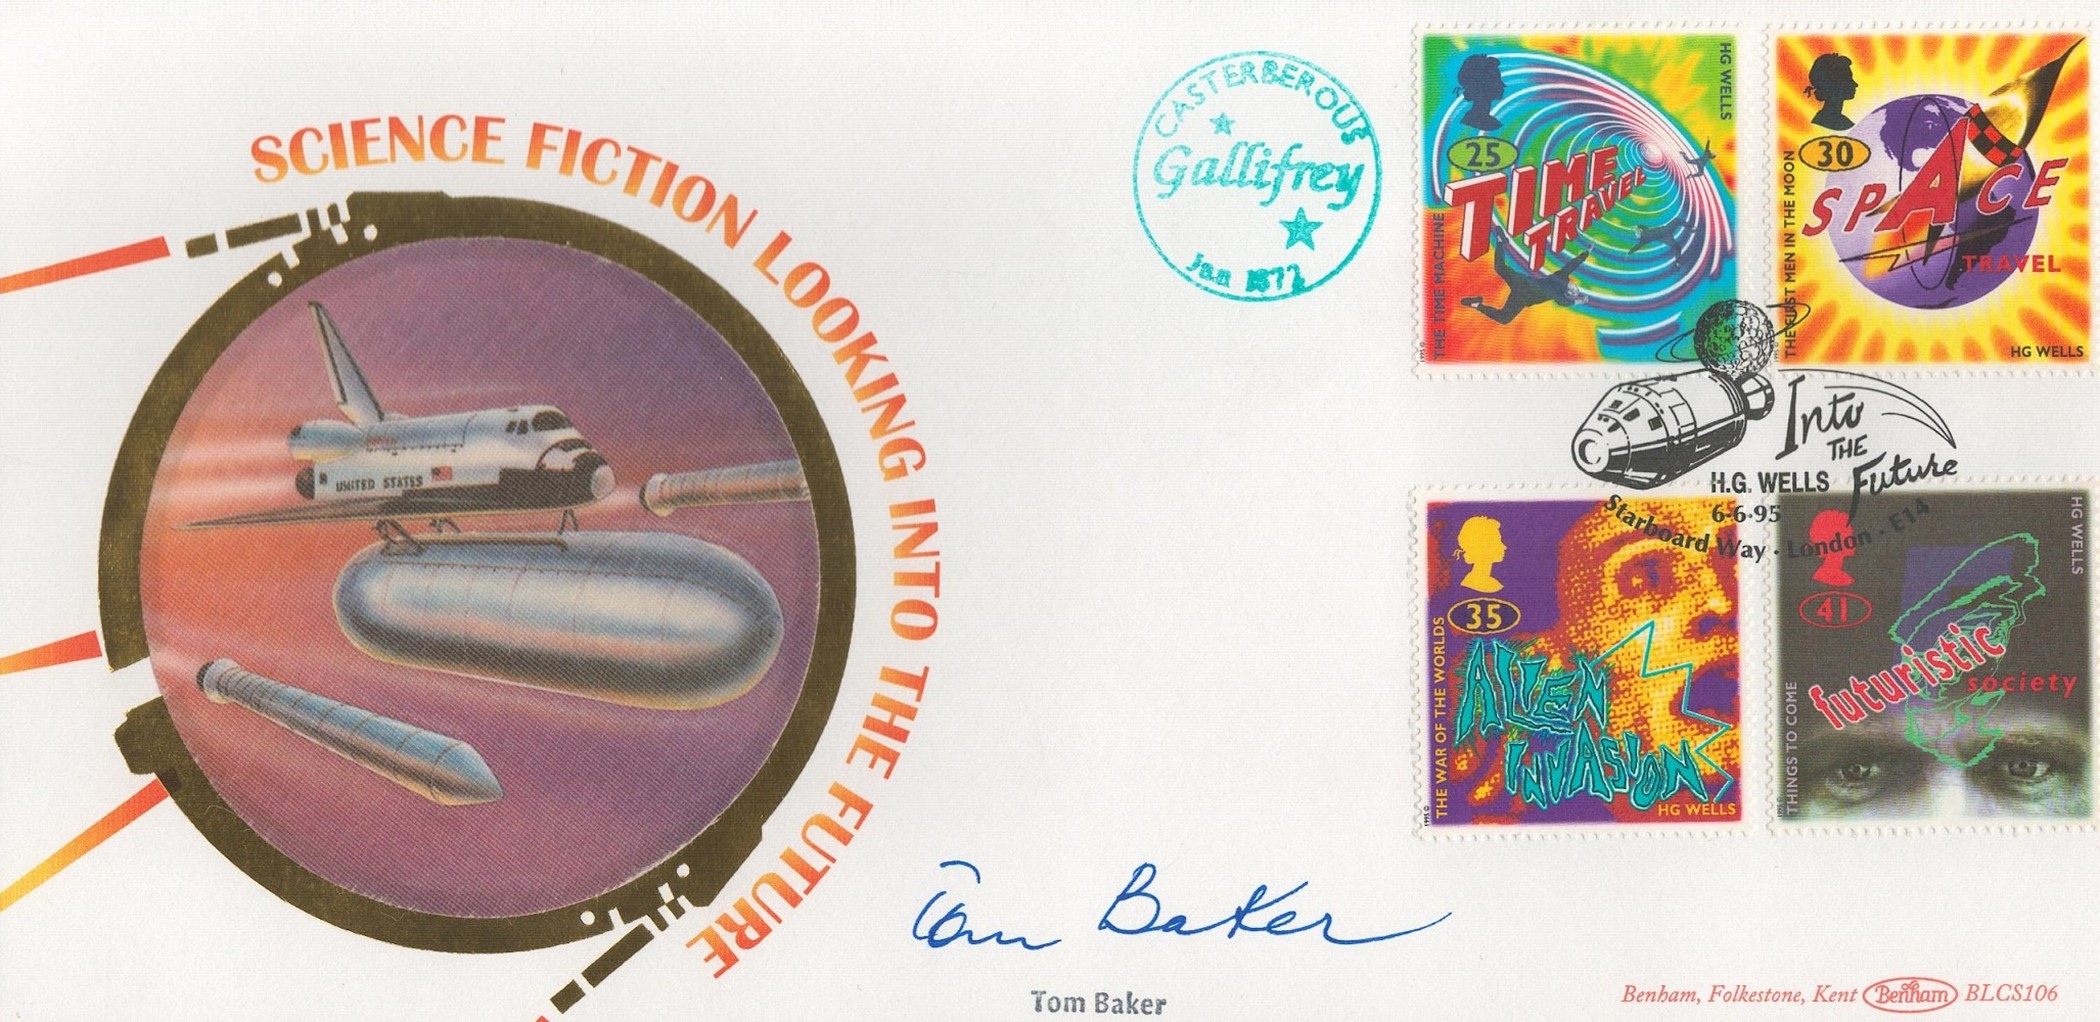 Tom Baker signed Science Fiction FDC. Postmark 6. 6. 95 and 4 stamps. Cover Number 2215/5000. Good